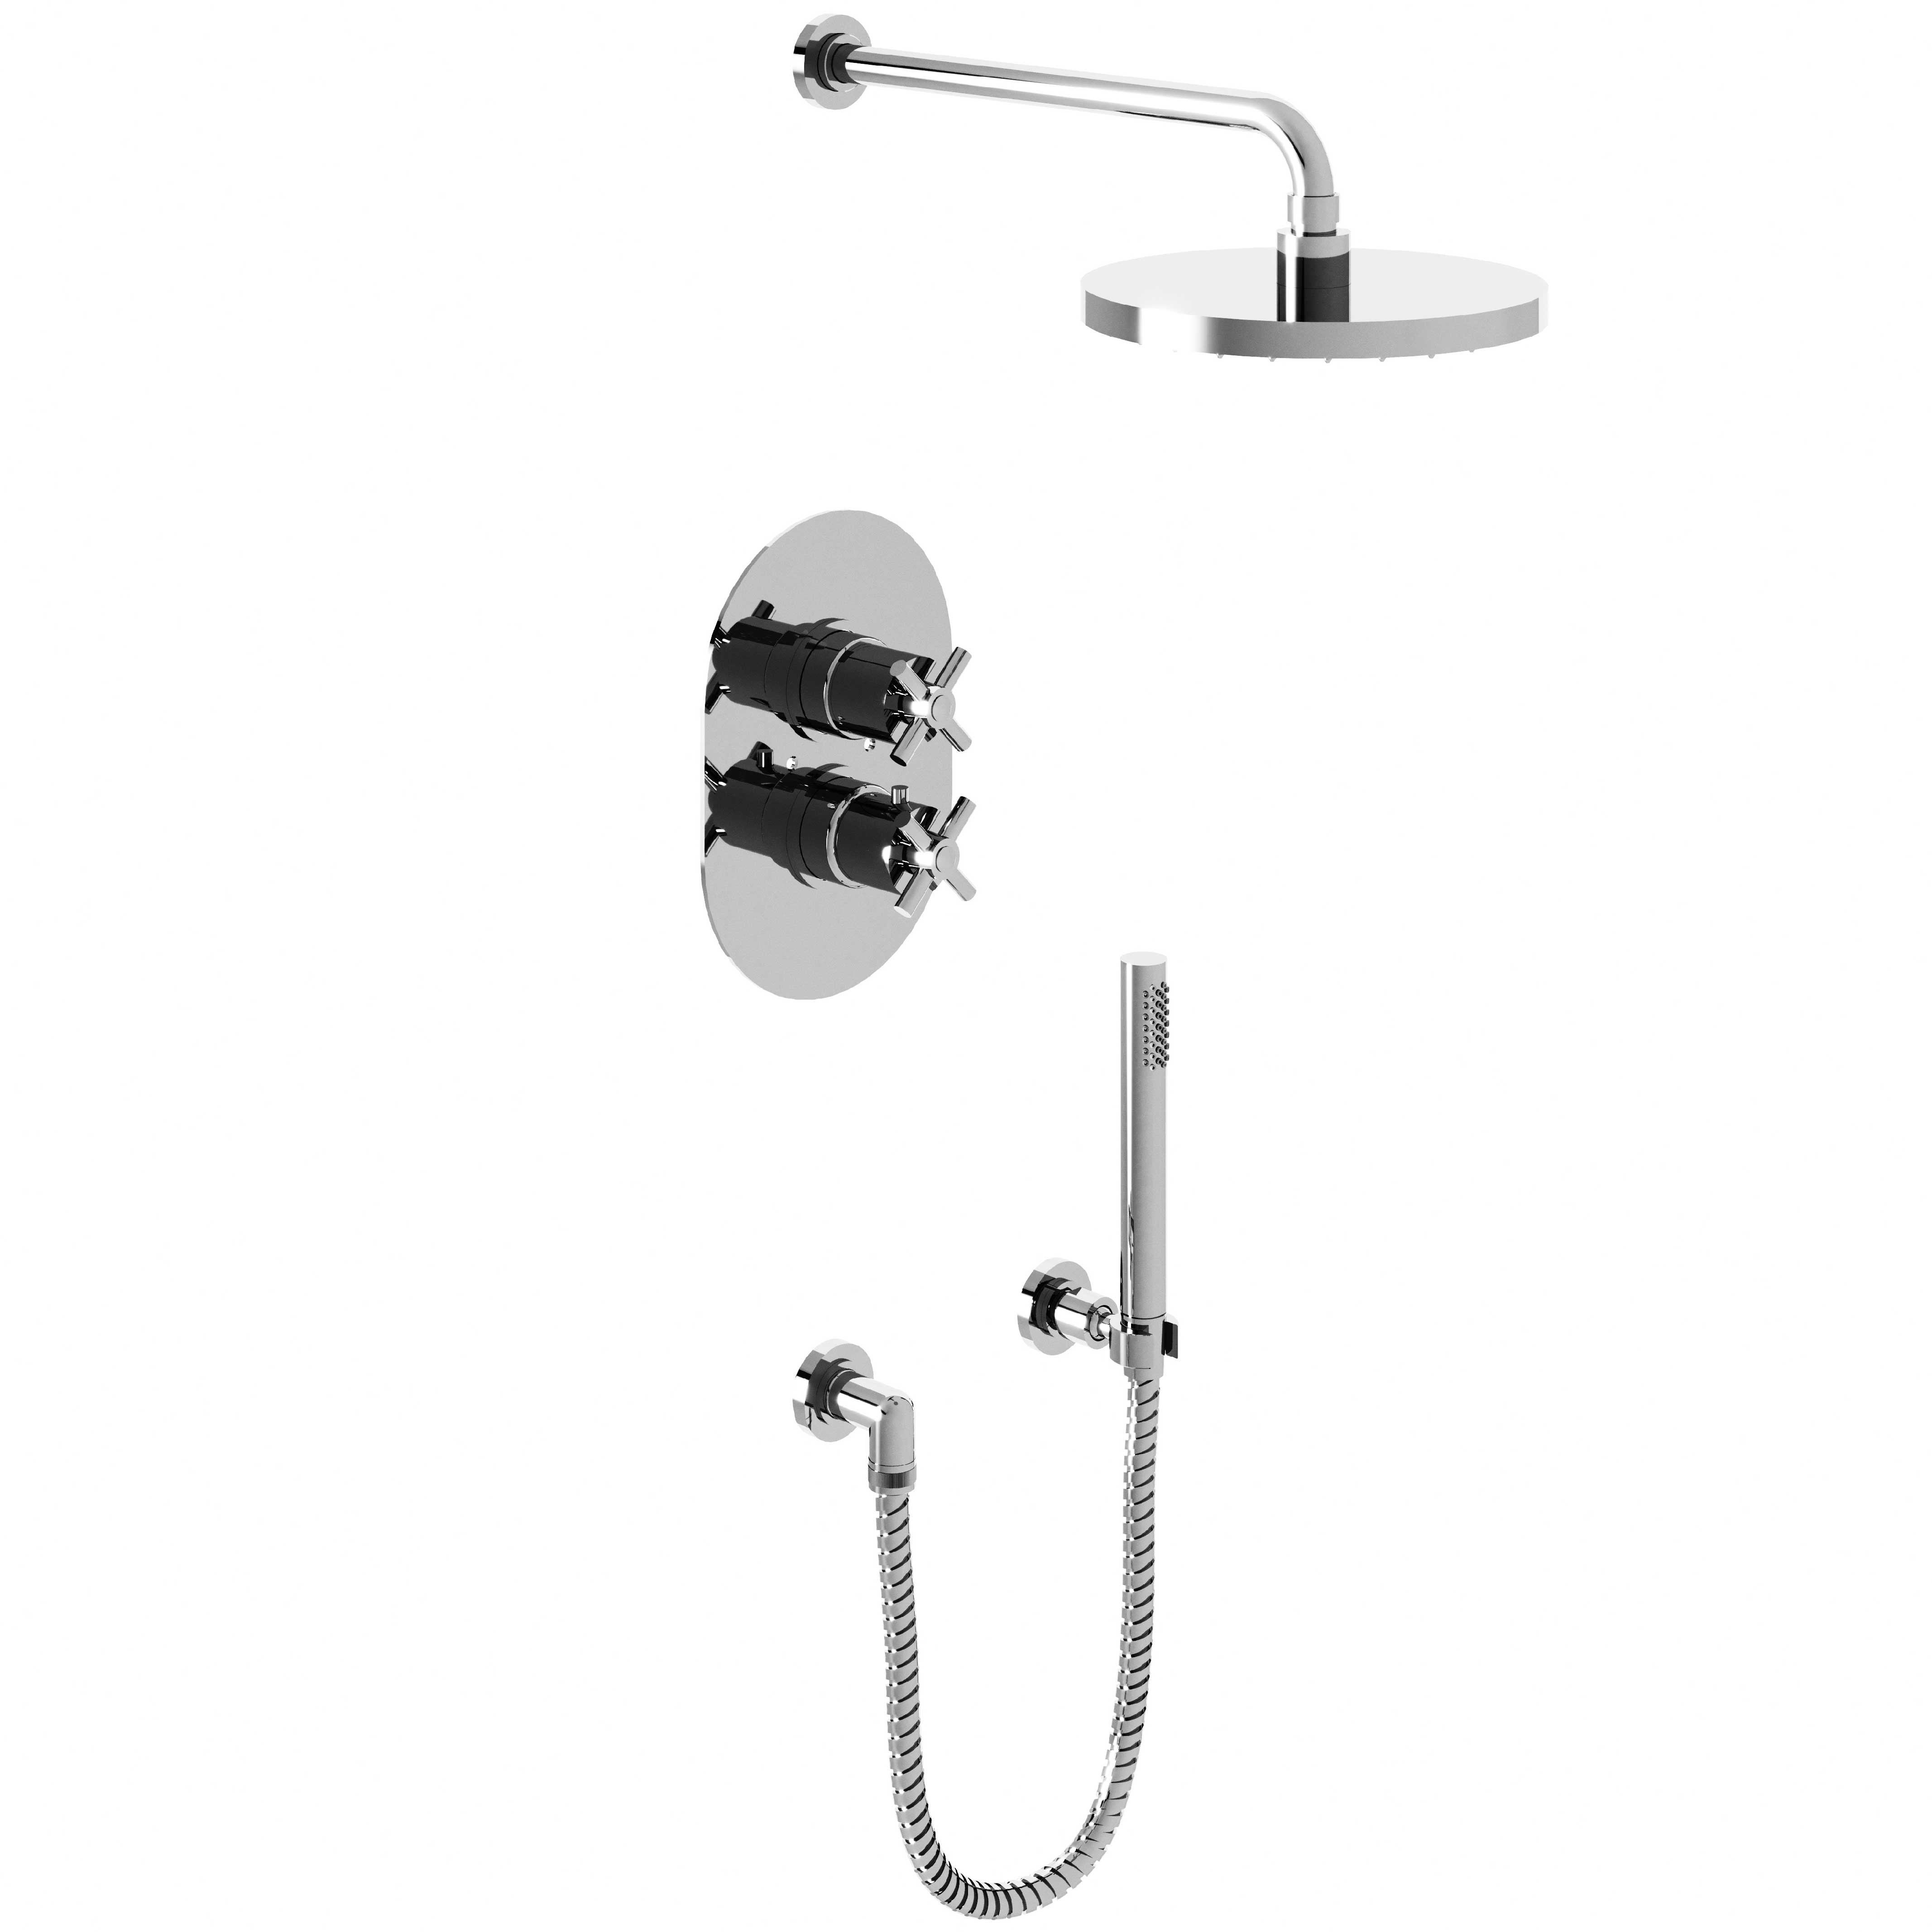 M90-2308T2 Thermostatic shower mixer package